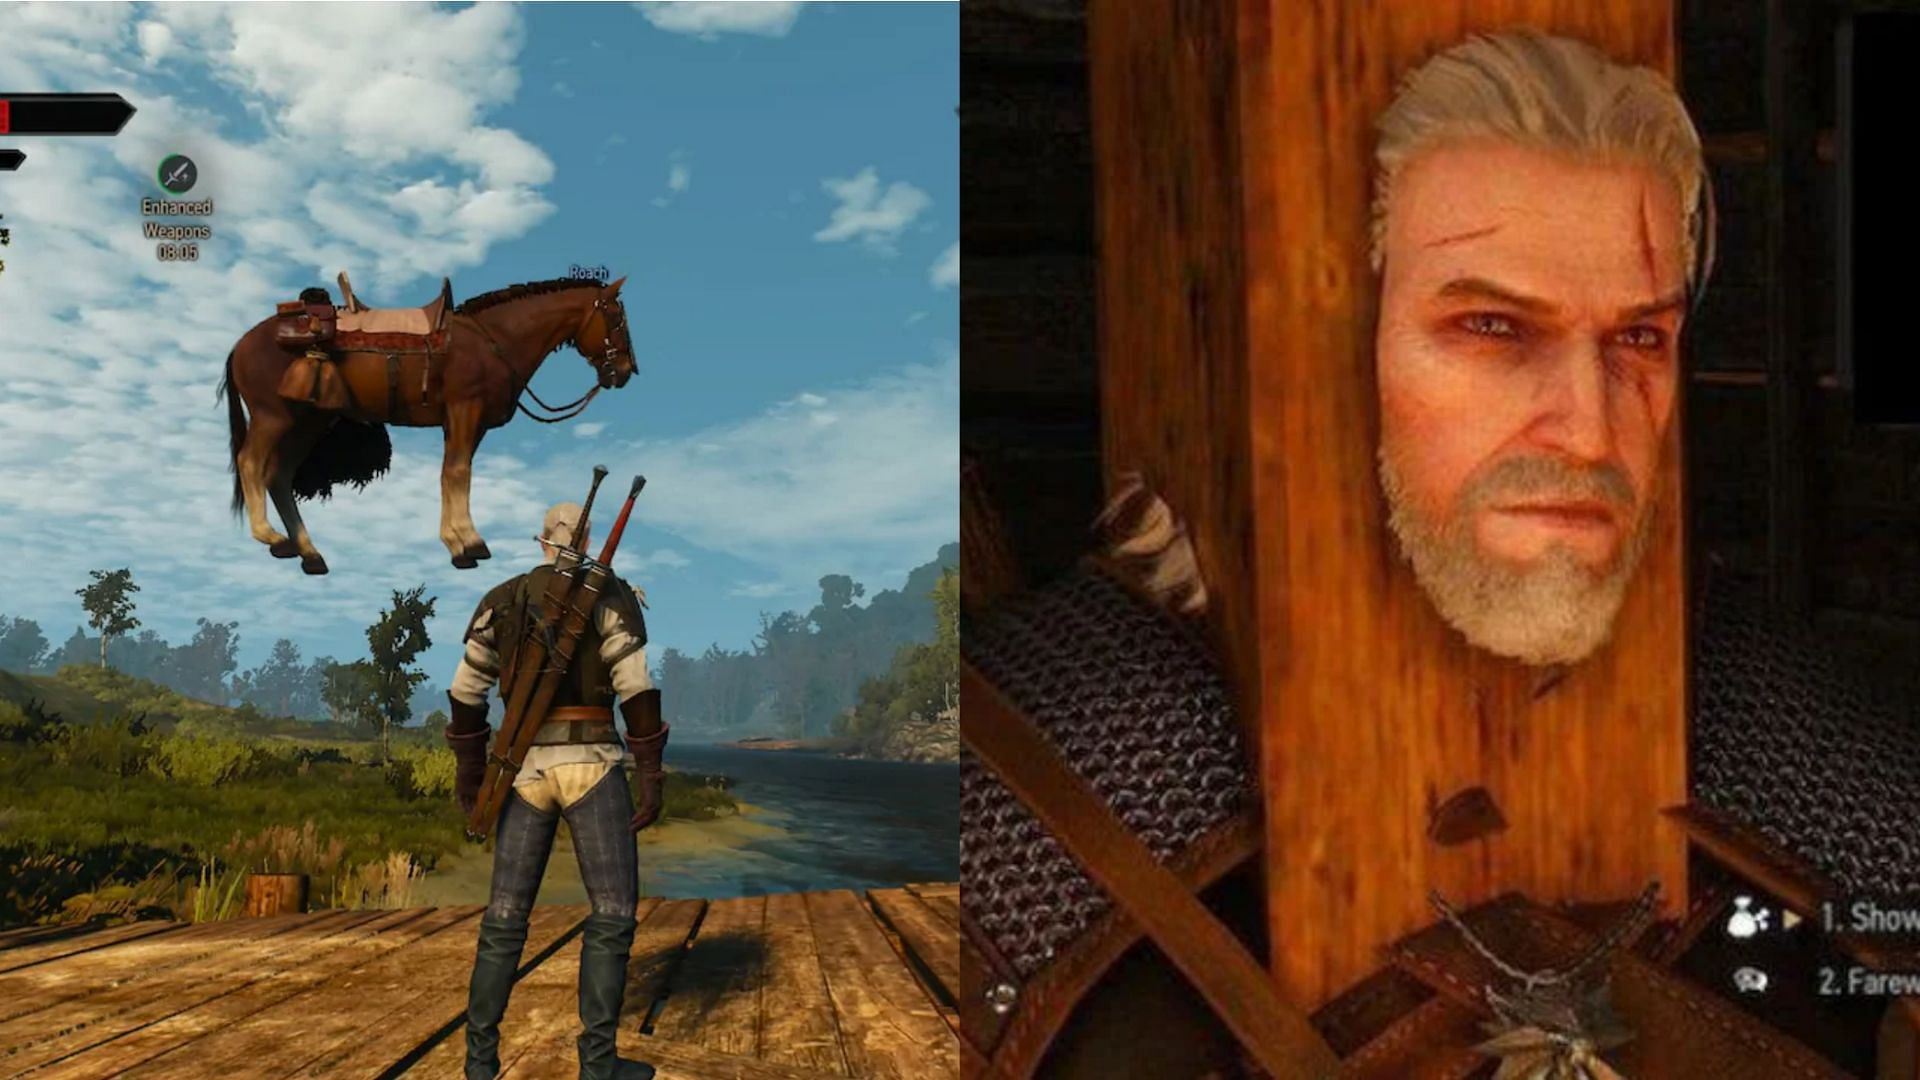 The Witcher 3 is notorious for bugs and glitches at launch (images via CD Projekt Red)